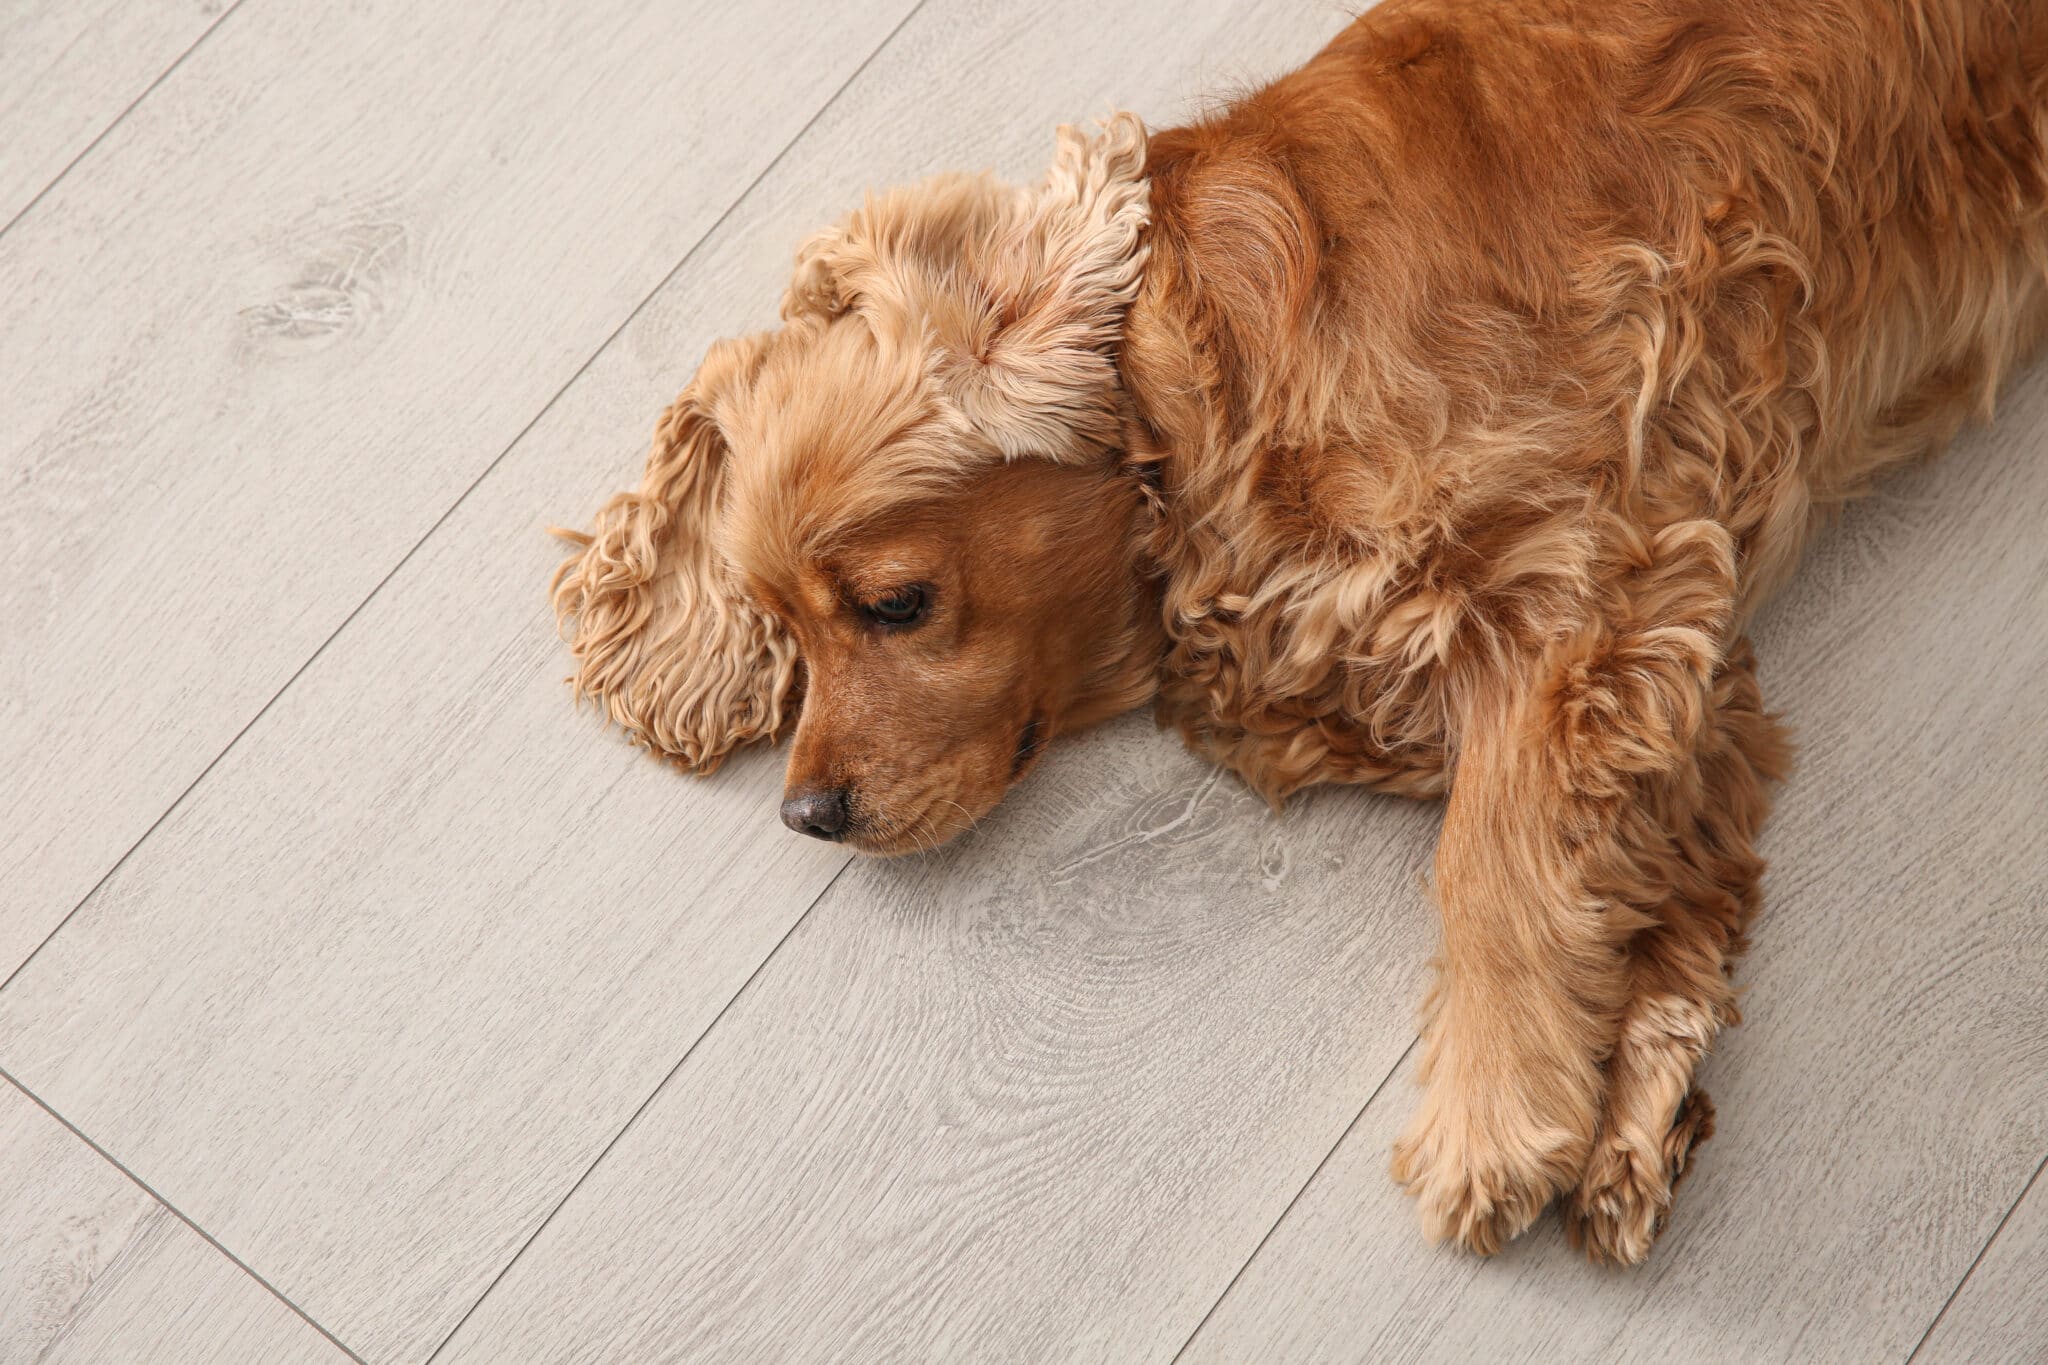 A dog lounging on Vancouver laminate flooring.